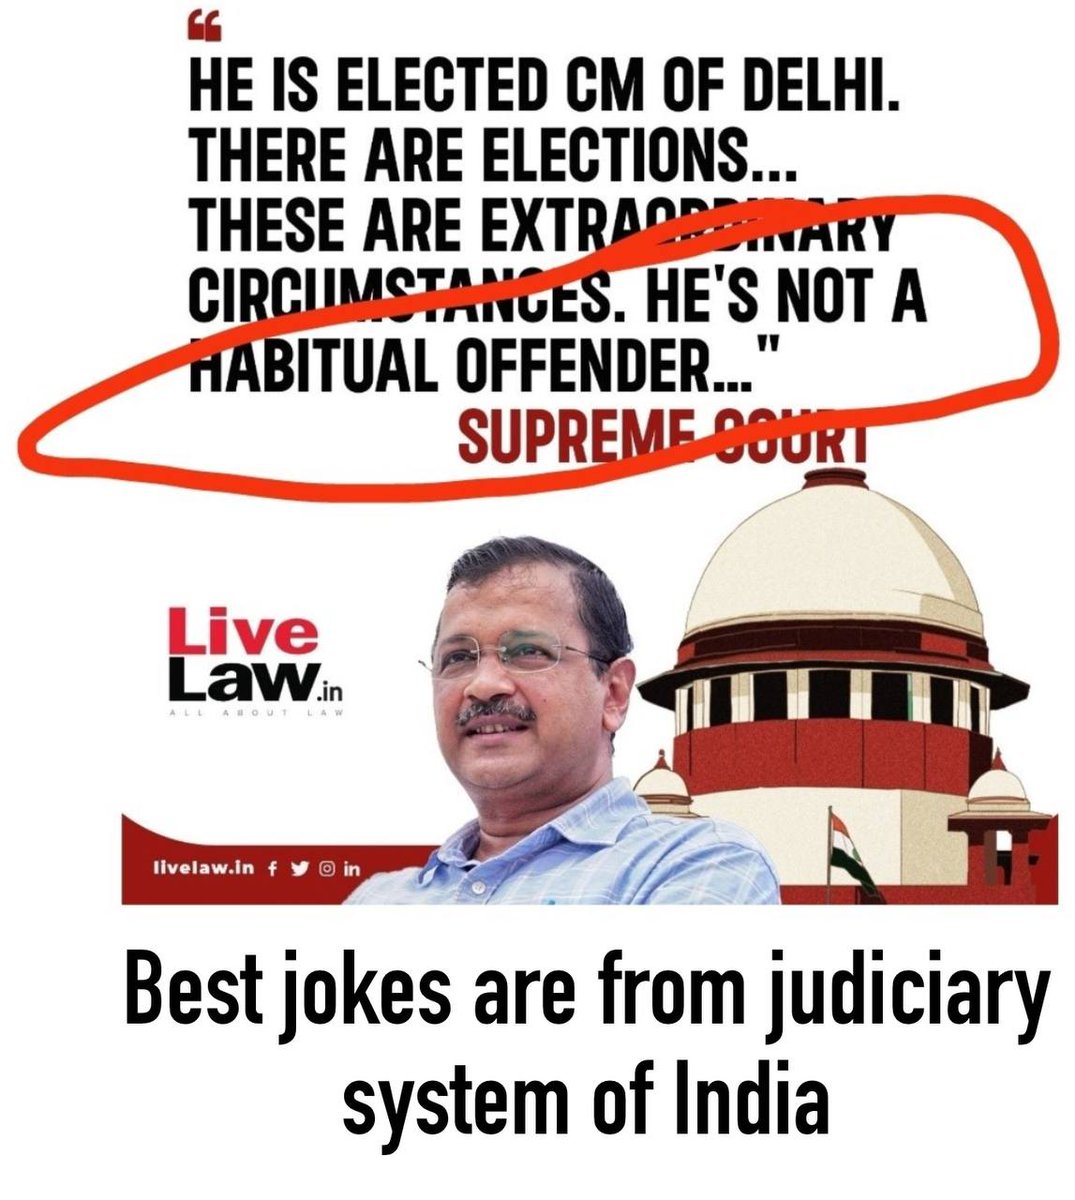 Believe it or not...
Read the last line 🥸
#SupremeCourtOfIndia